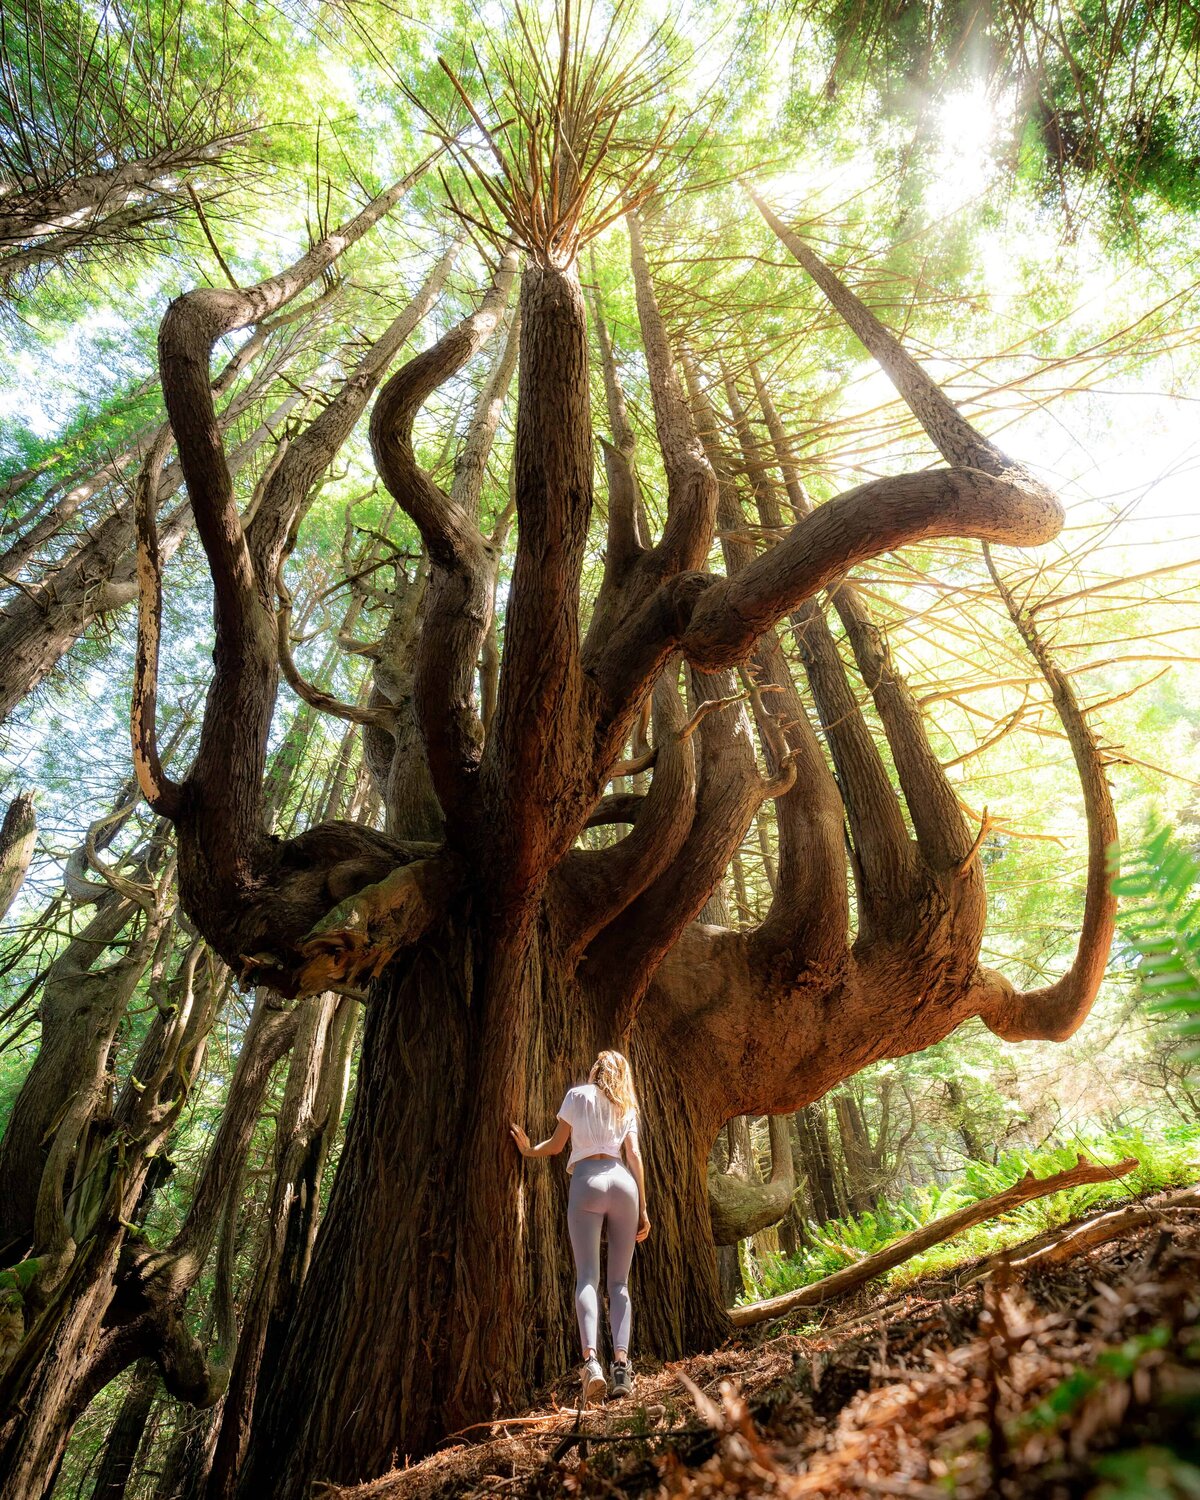 Woman in Glyder leggings looking up at very large tree in a forest